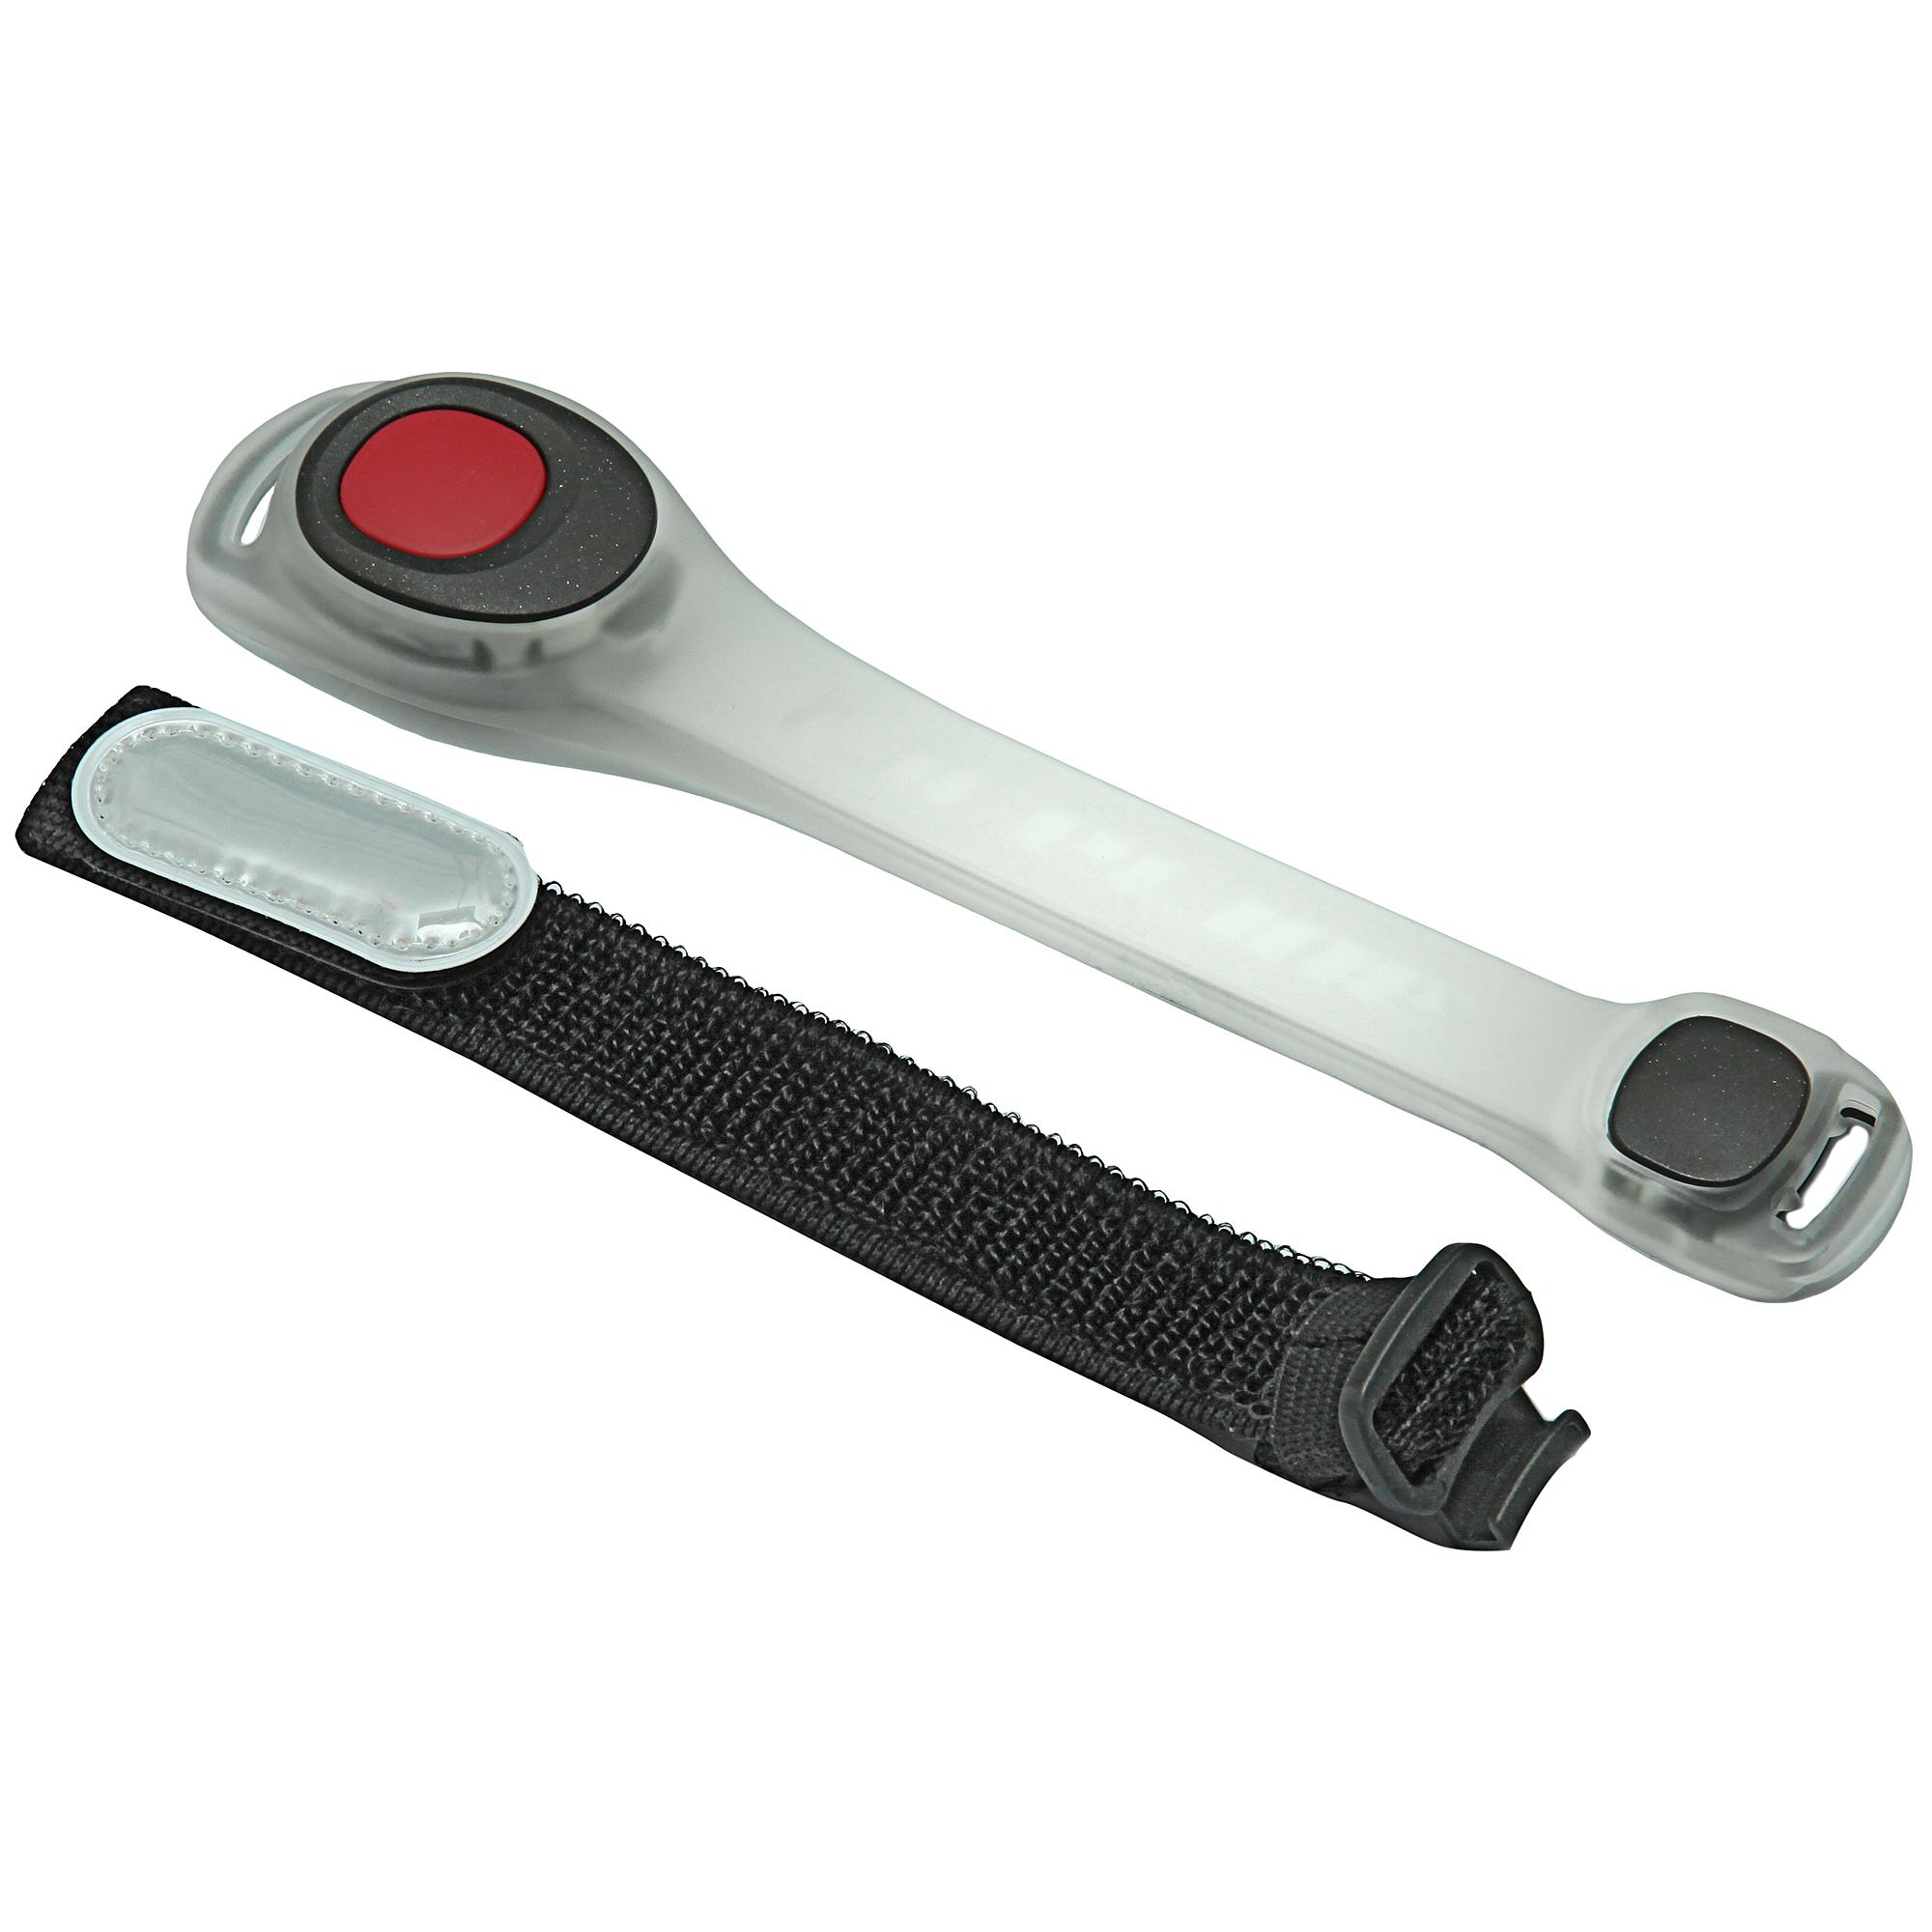 Lifeline Arm Band Safety Light - Red